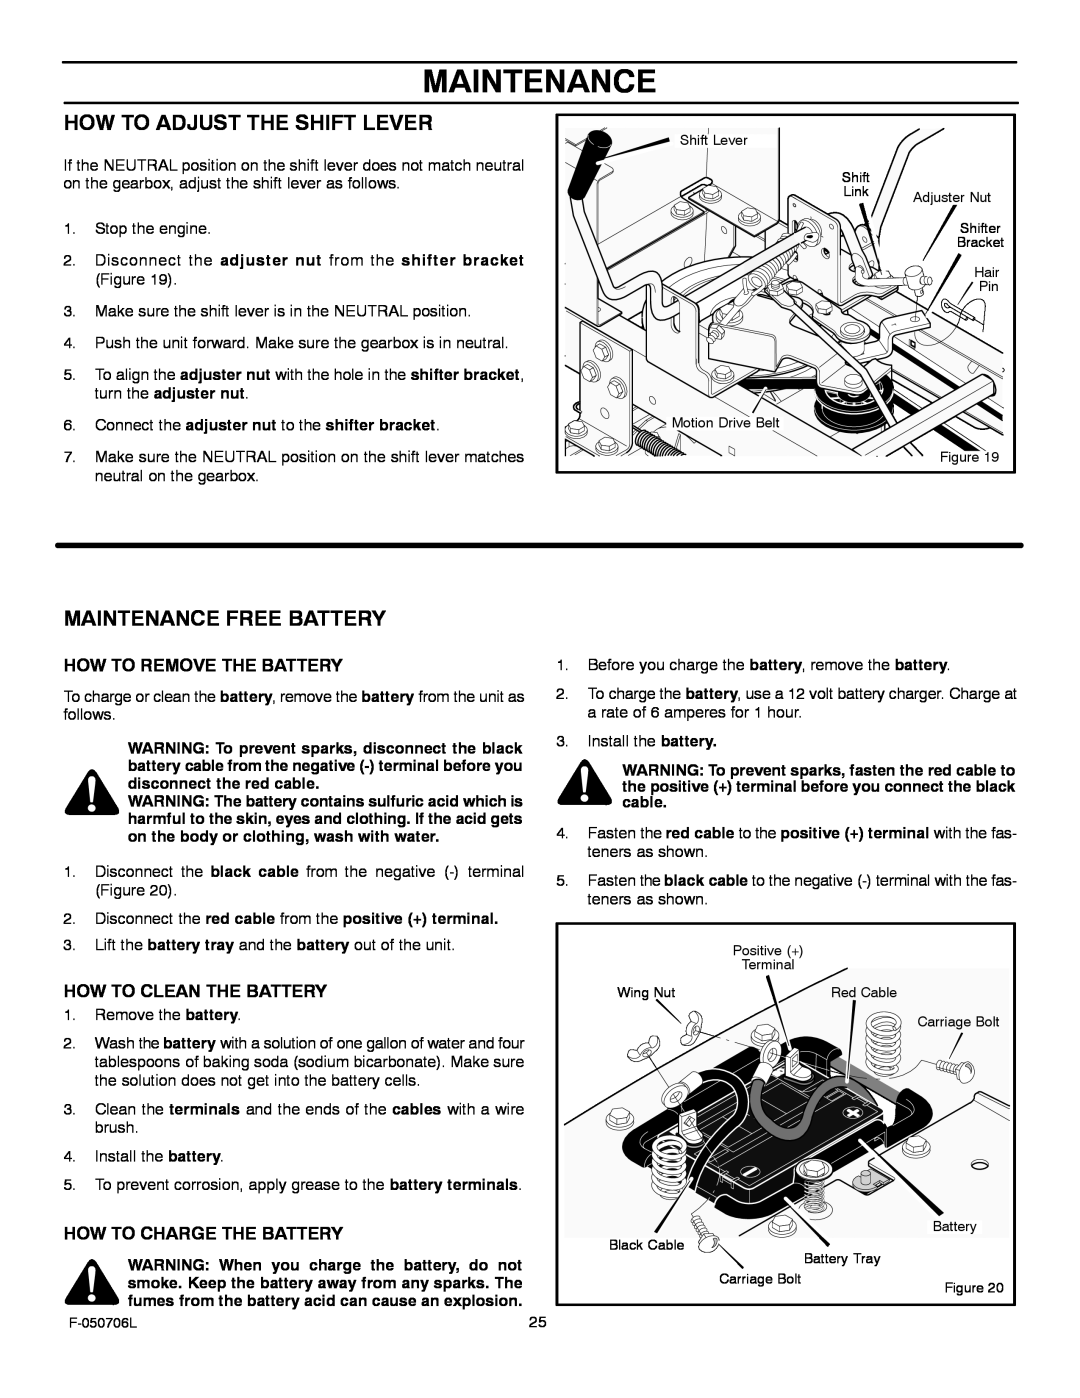 Murray 425014x92B manual How To Adjust The Shift Lever, Maintenance Free Battery, How To Remove The Battery 